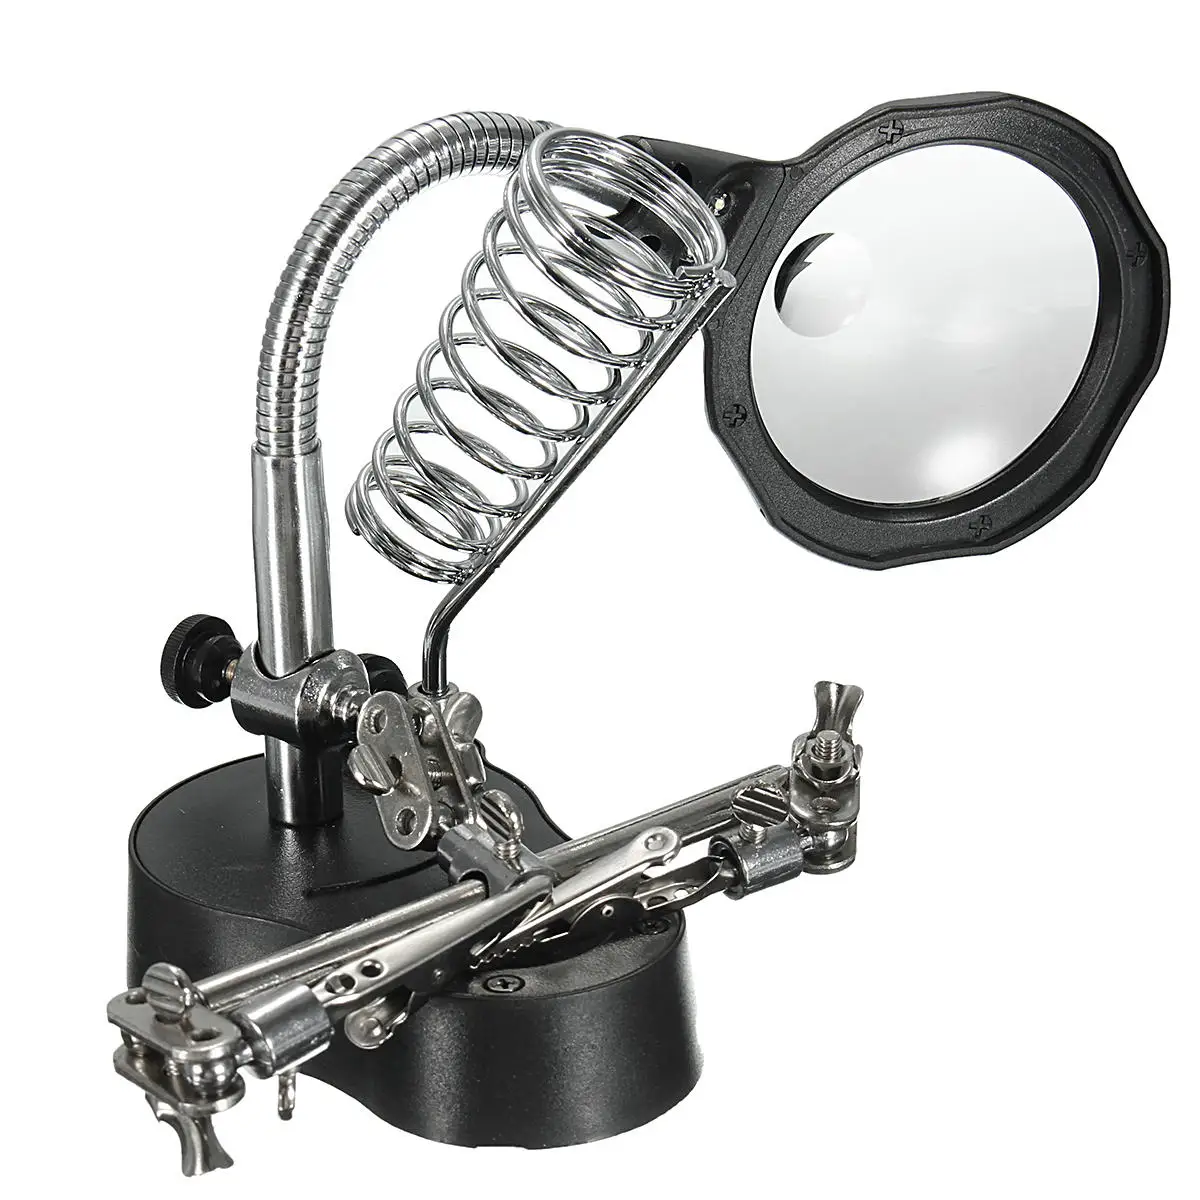 SALUTUYA LED Magnifier Stable Base Welding LED Magnifier,for Assemble Products or Model Makers